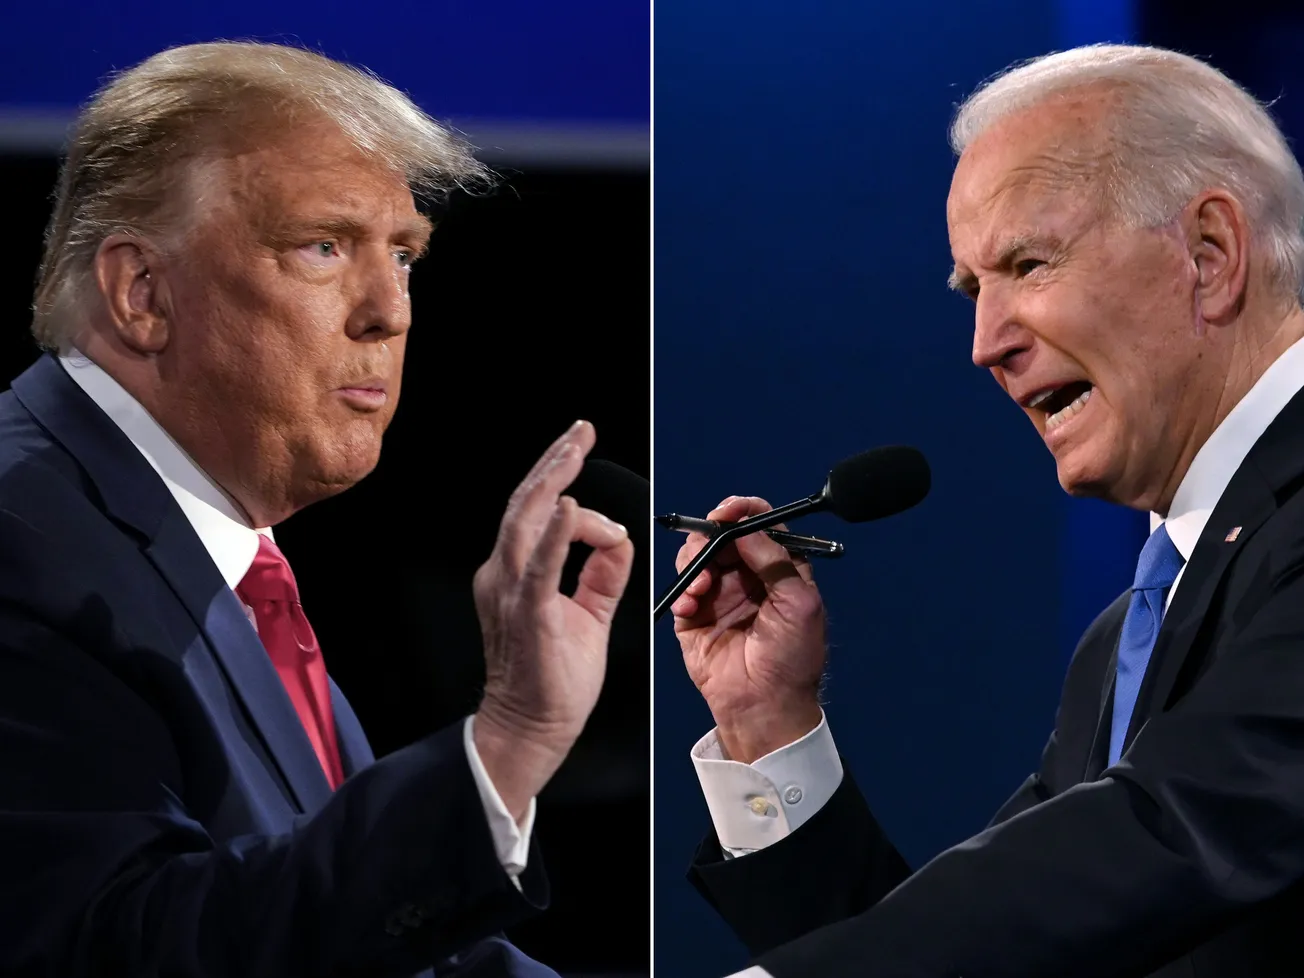 It's Not Just MAGA Magic—Trump Holds Big Lead Over Biden On Most Key Issues In Latest I&I/TIPP Poll